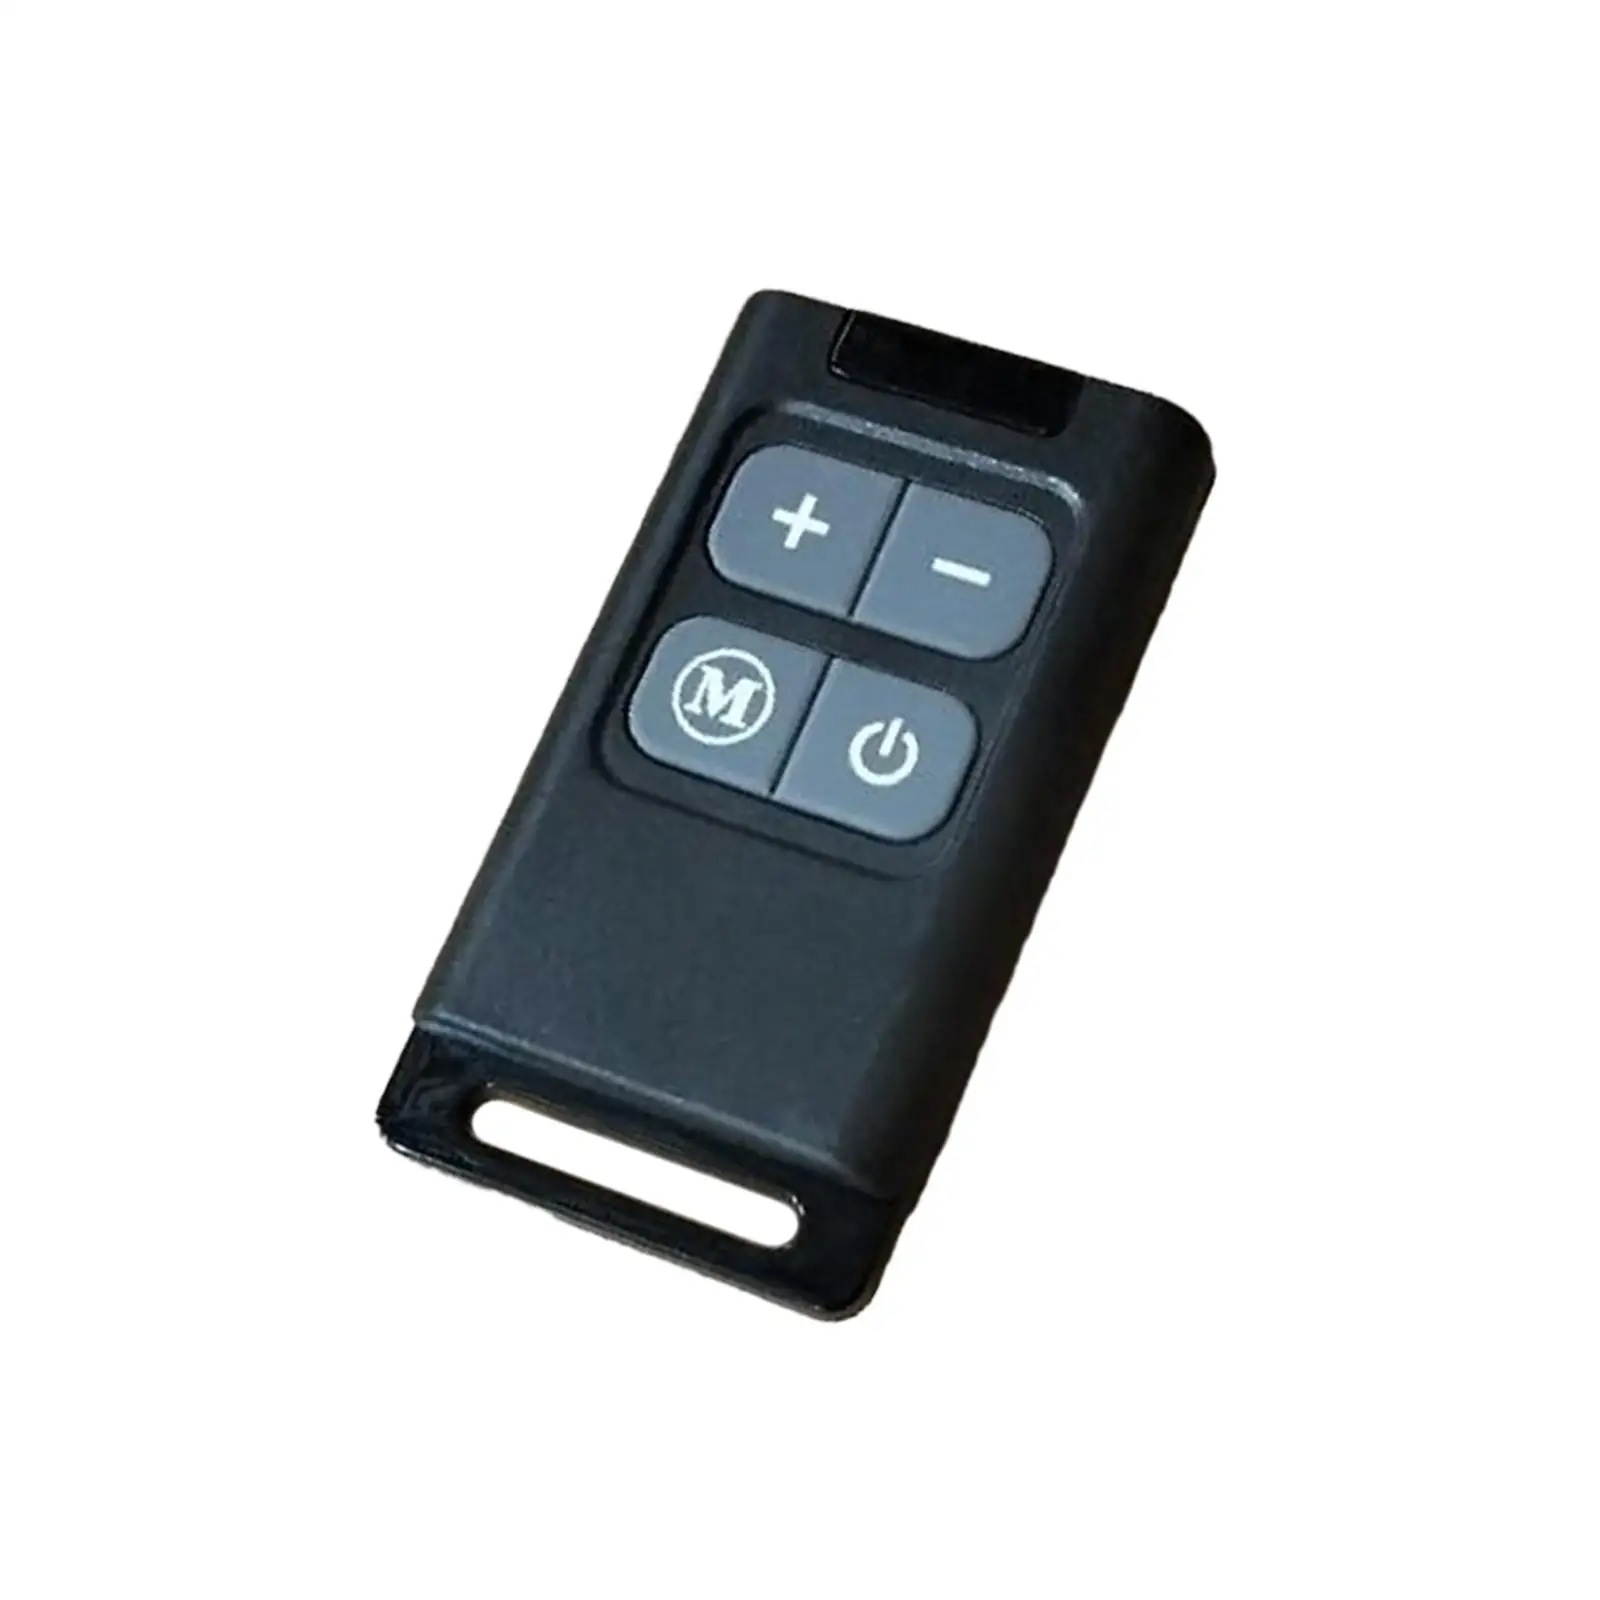 Car Parking Heater Remote Control Universal for Heater Controller Automotive Boat Car Diesels Air Heater Parking Heater RV